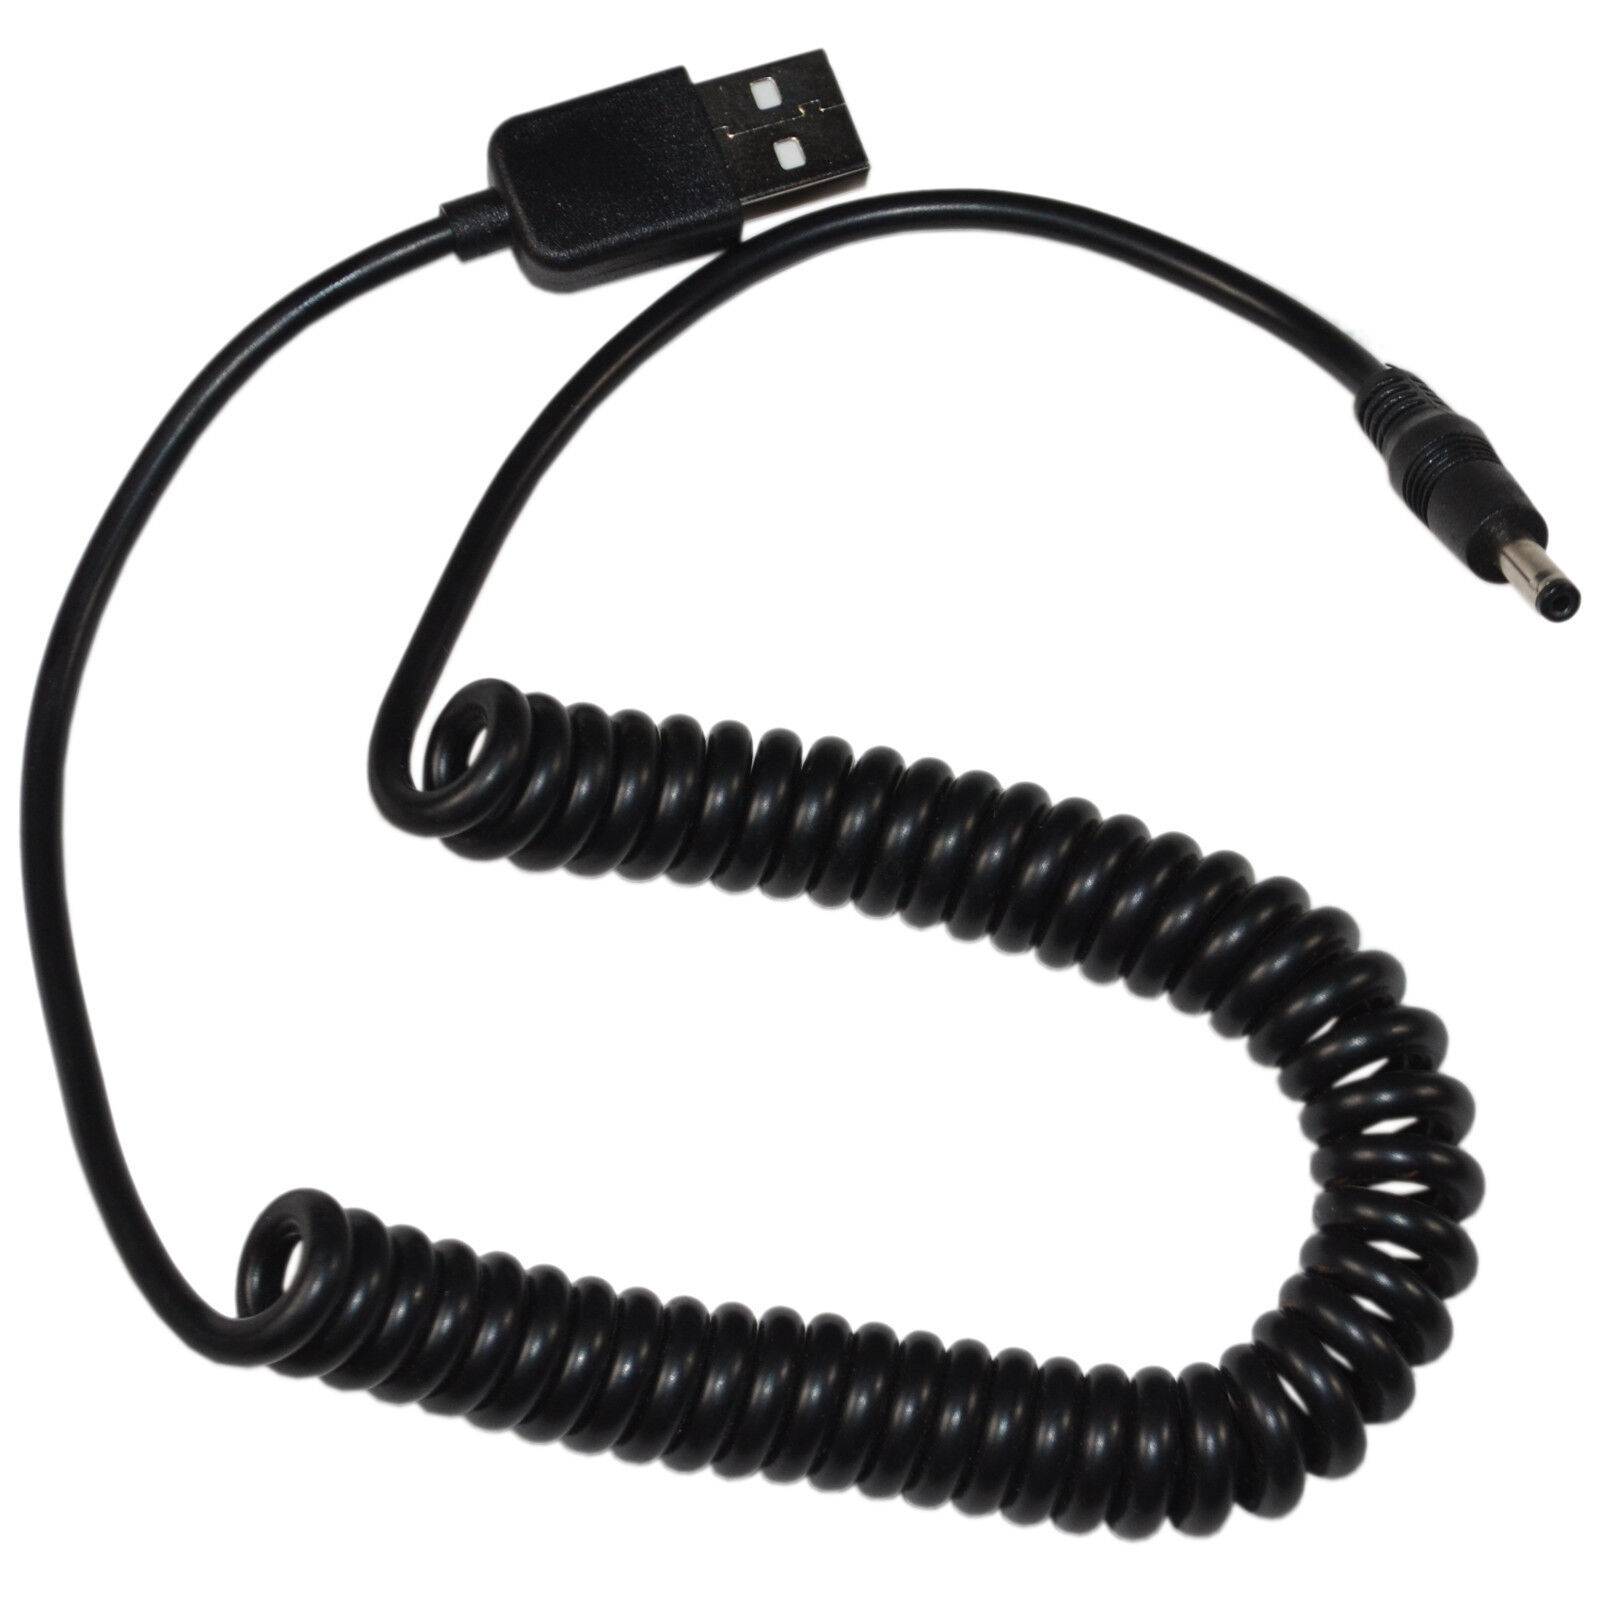 HQRP USB Adapter Cable 3.5mm x 1.35mm Plug for USB HUB Radio Speaker Tablet PC